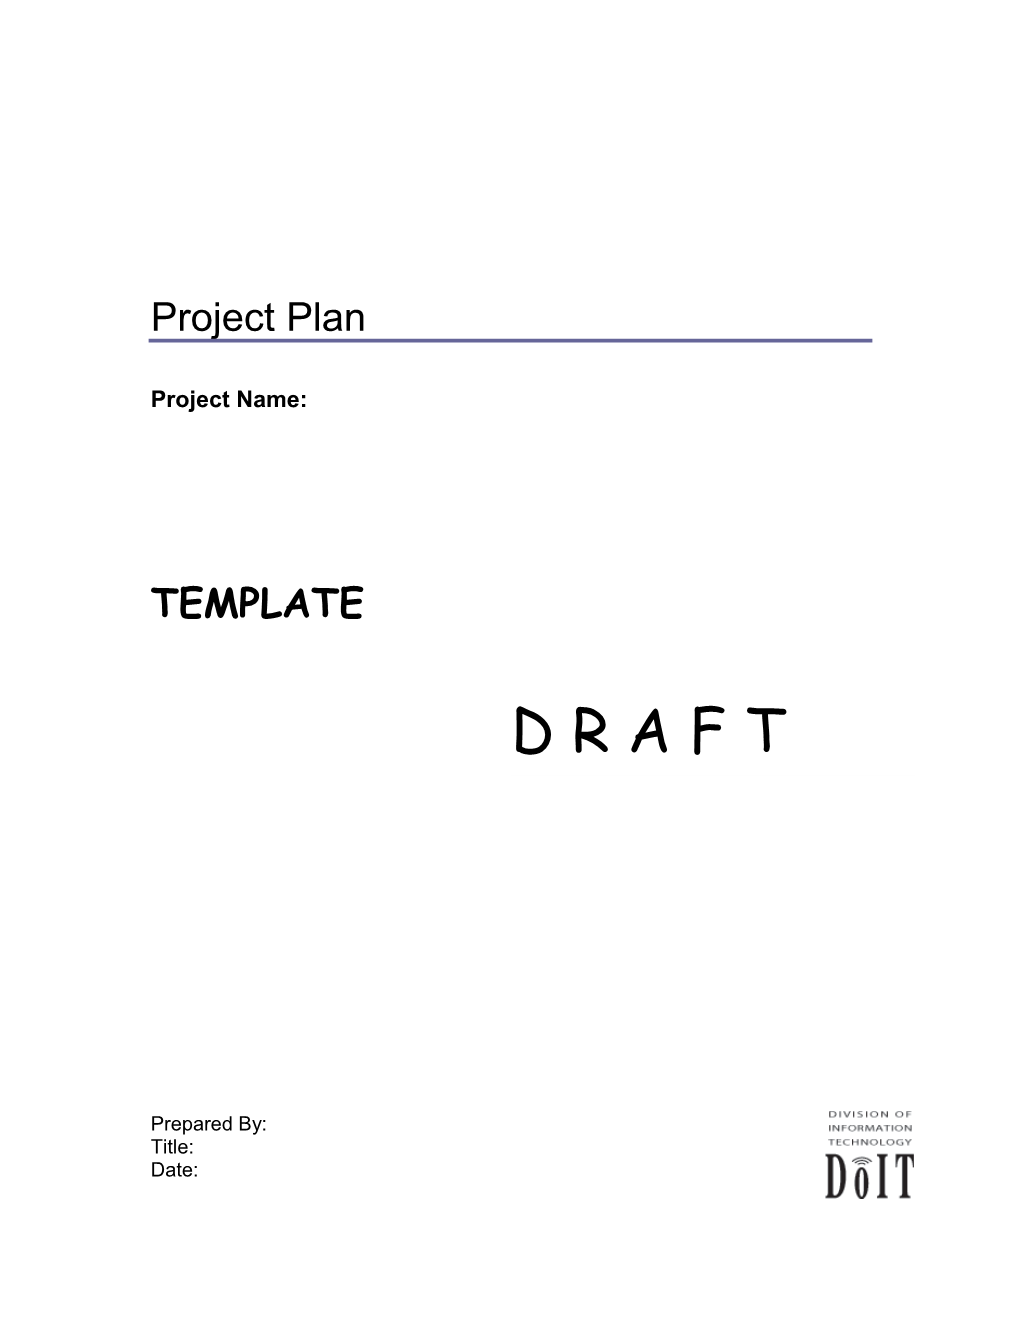 Project Plan Approval Signatures